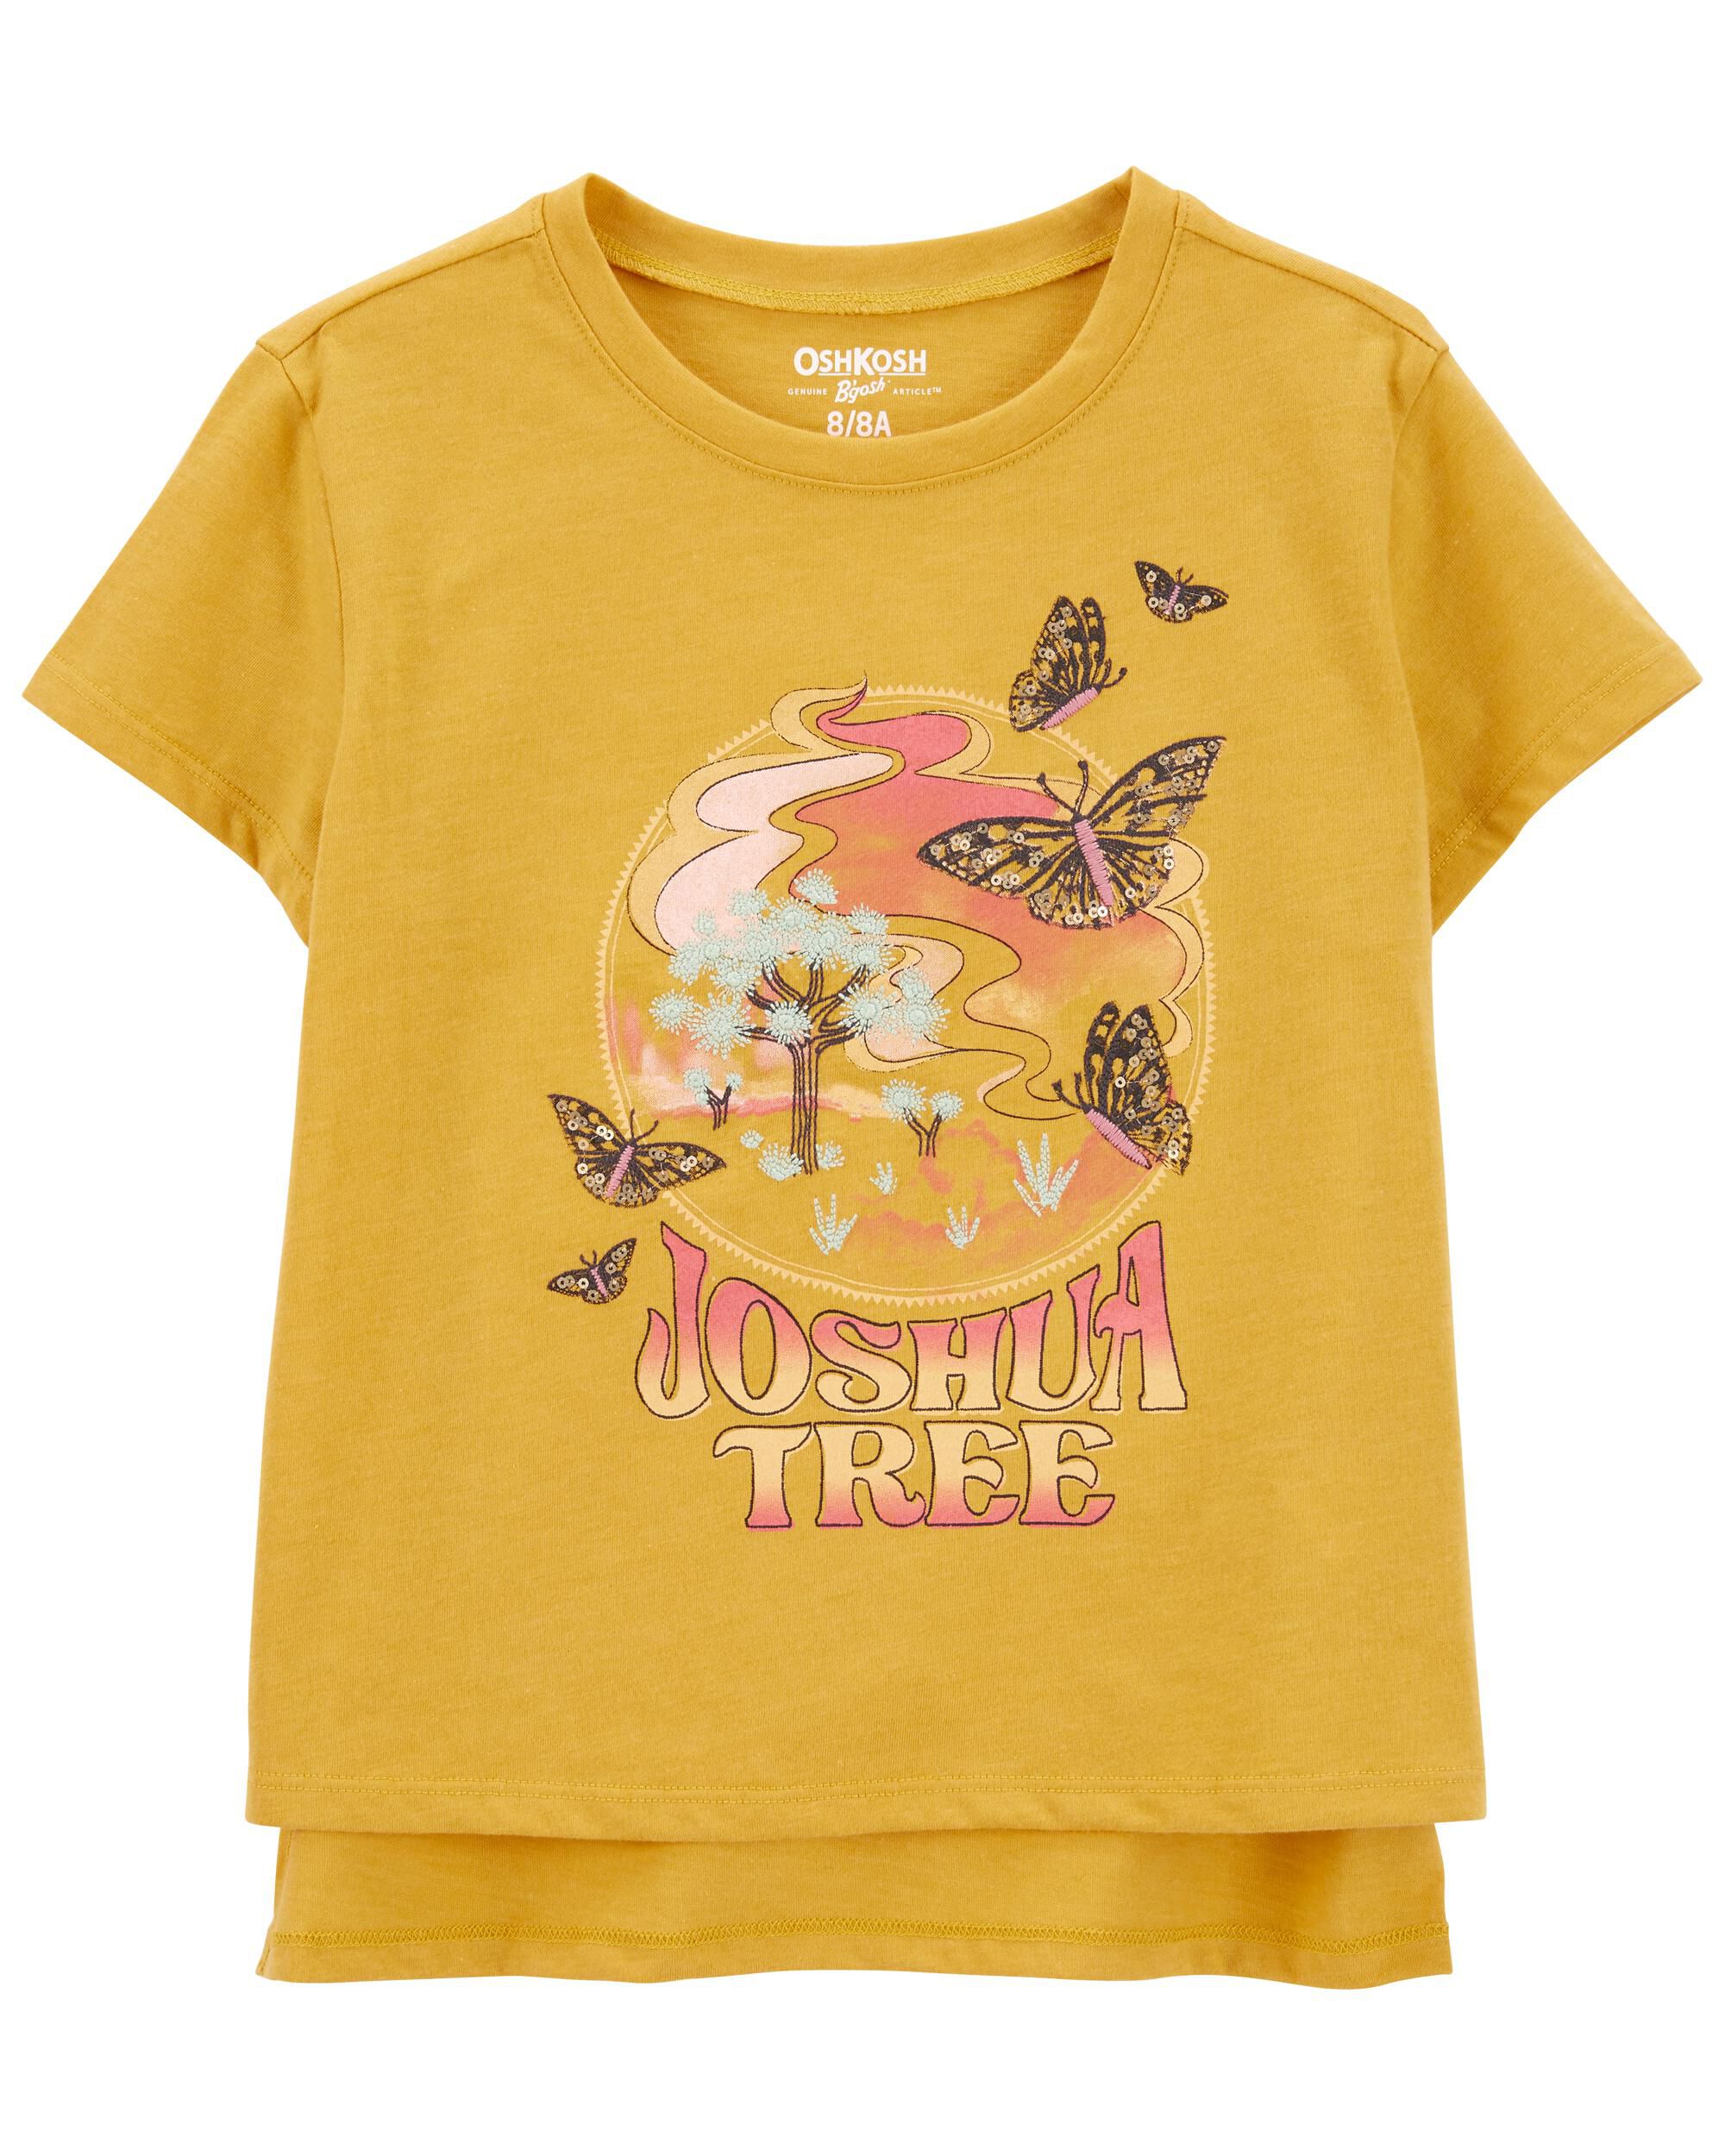 Carters Destination Graphic Tee